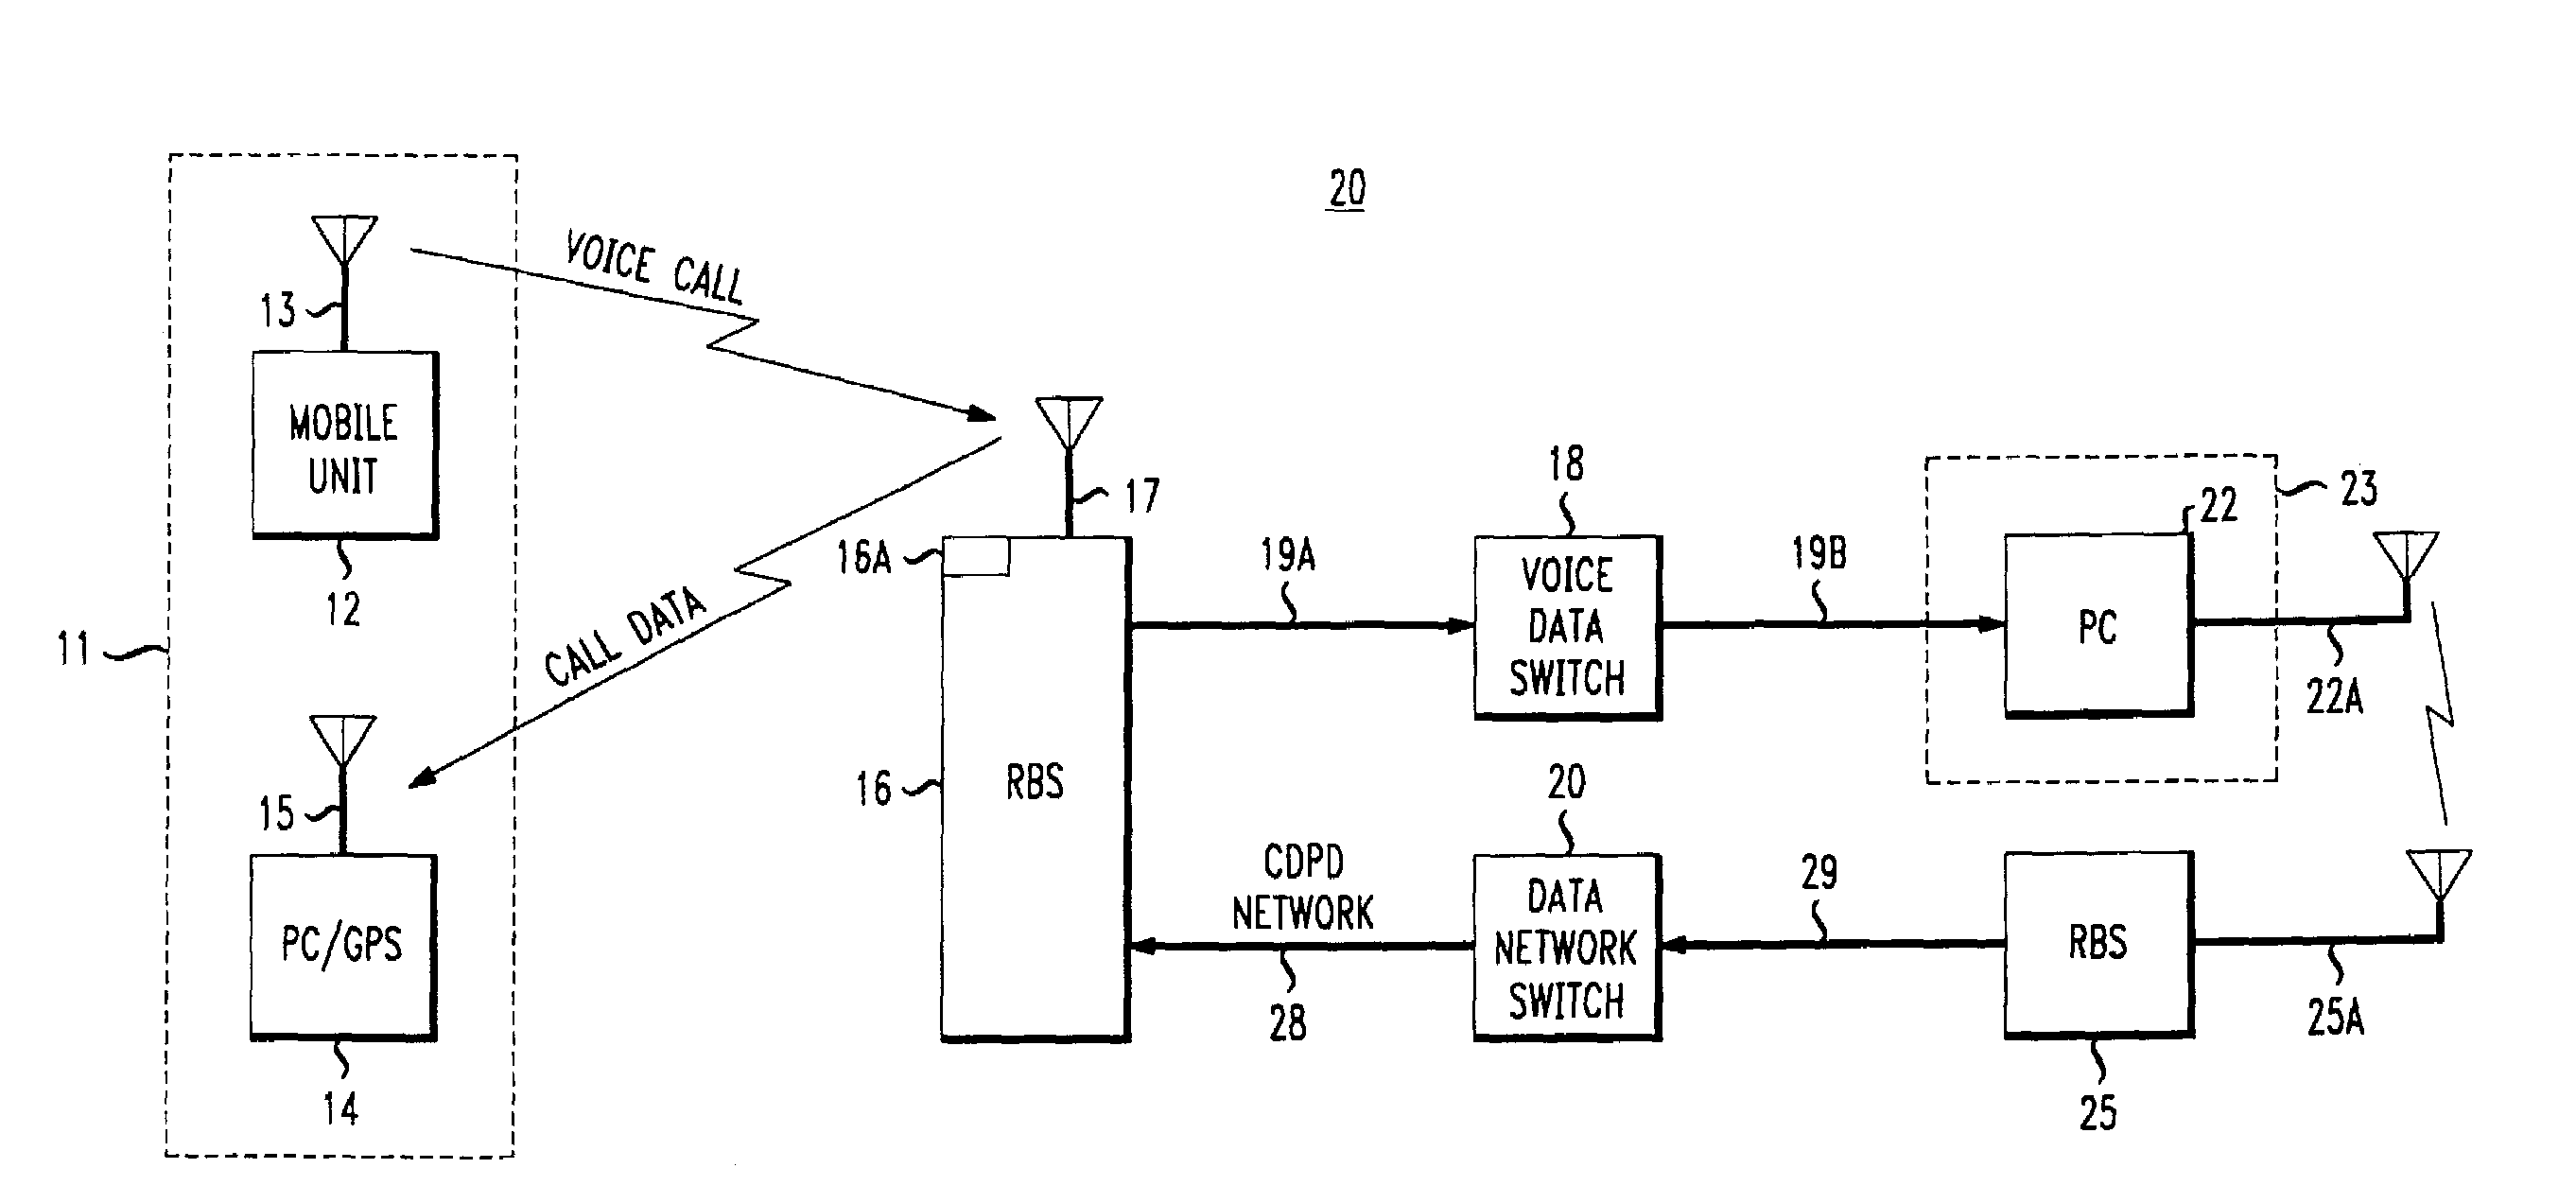 Method and system for optimizing performance of a mobile communications system